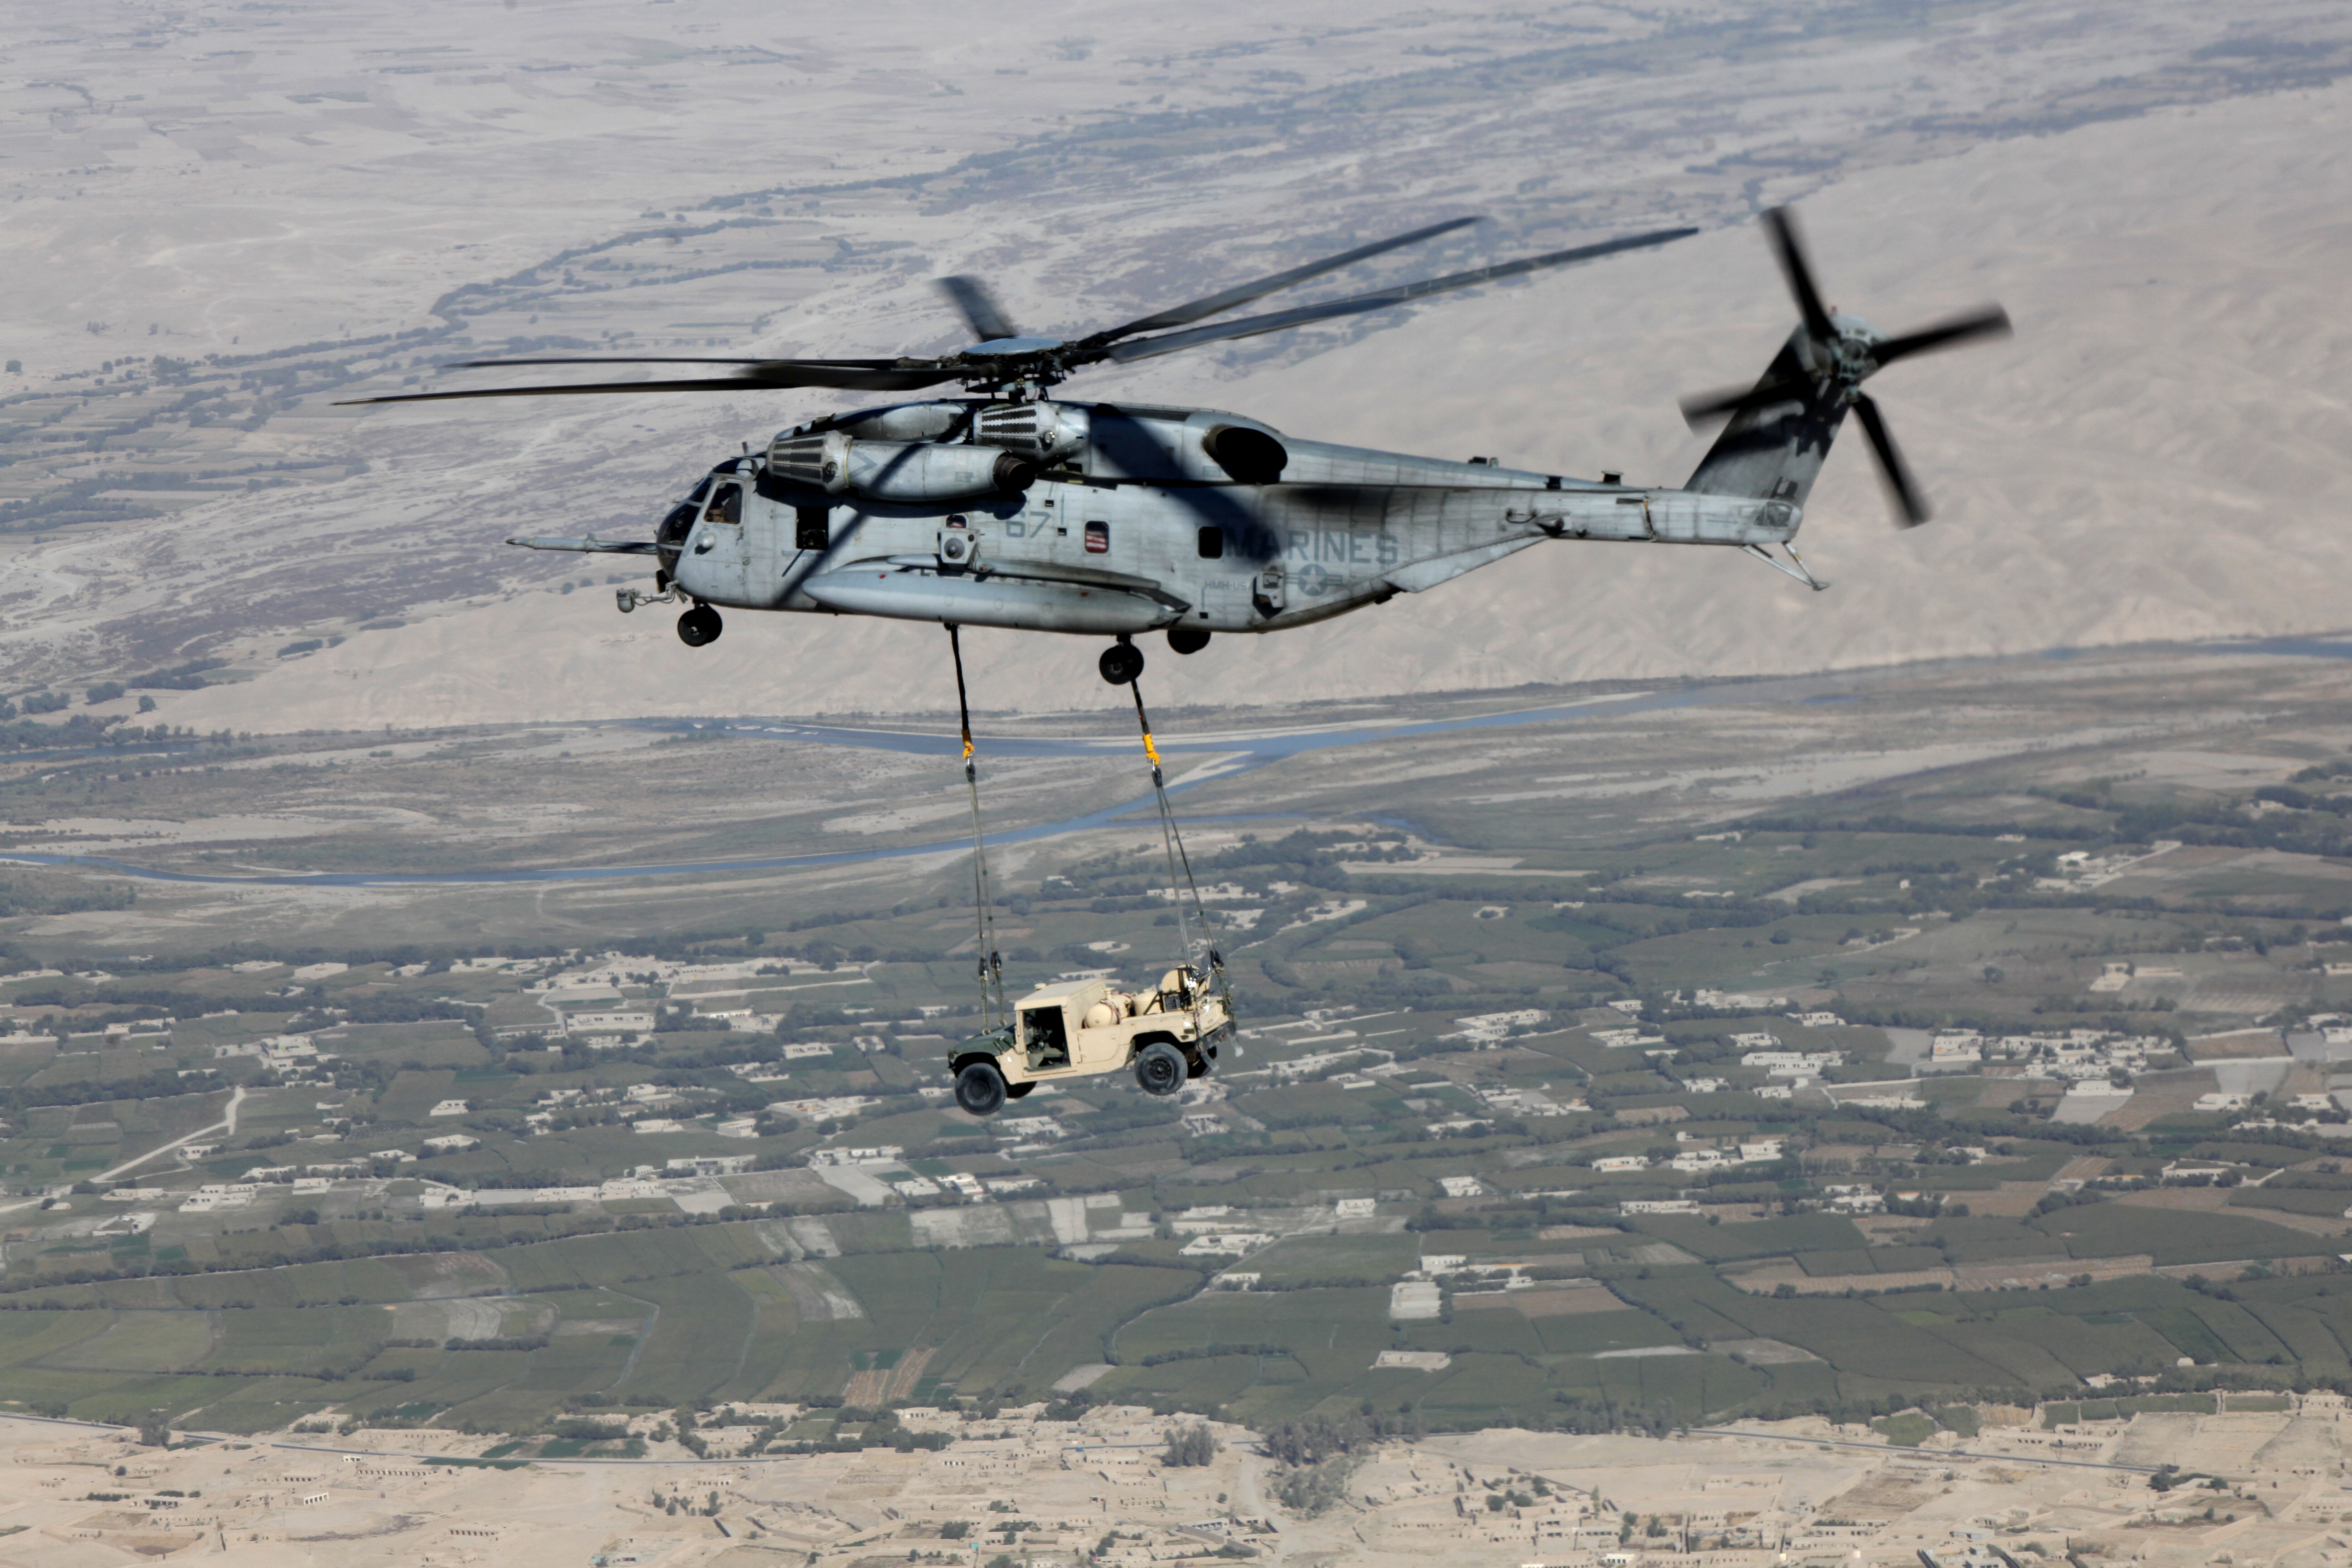 File:A U.S. Marine Corps CH-53E Super Stallion helicopter assigned ...